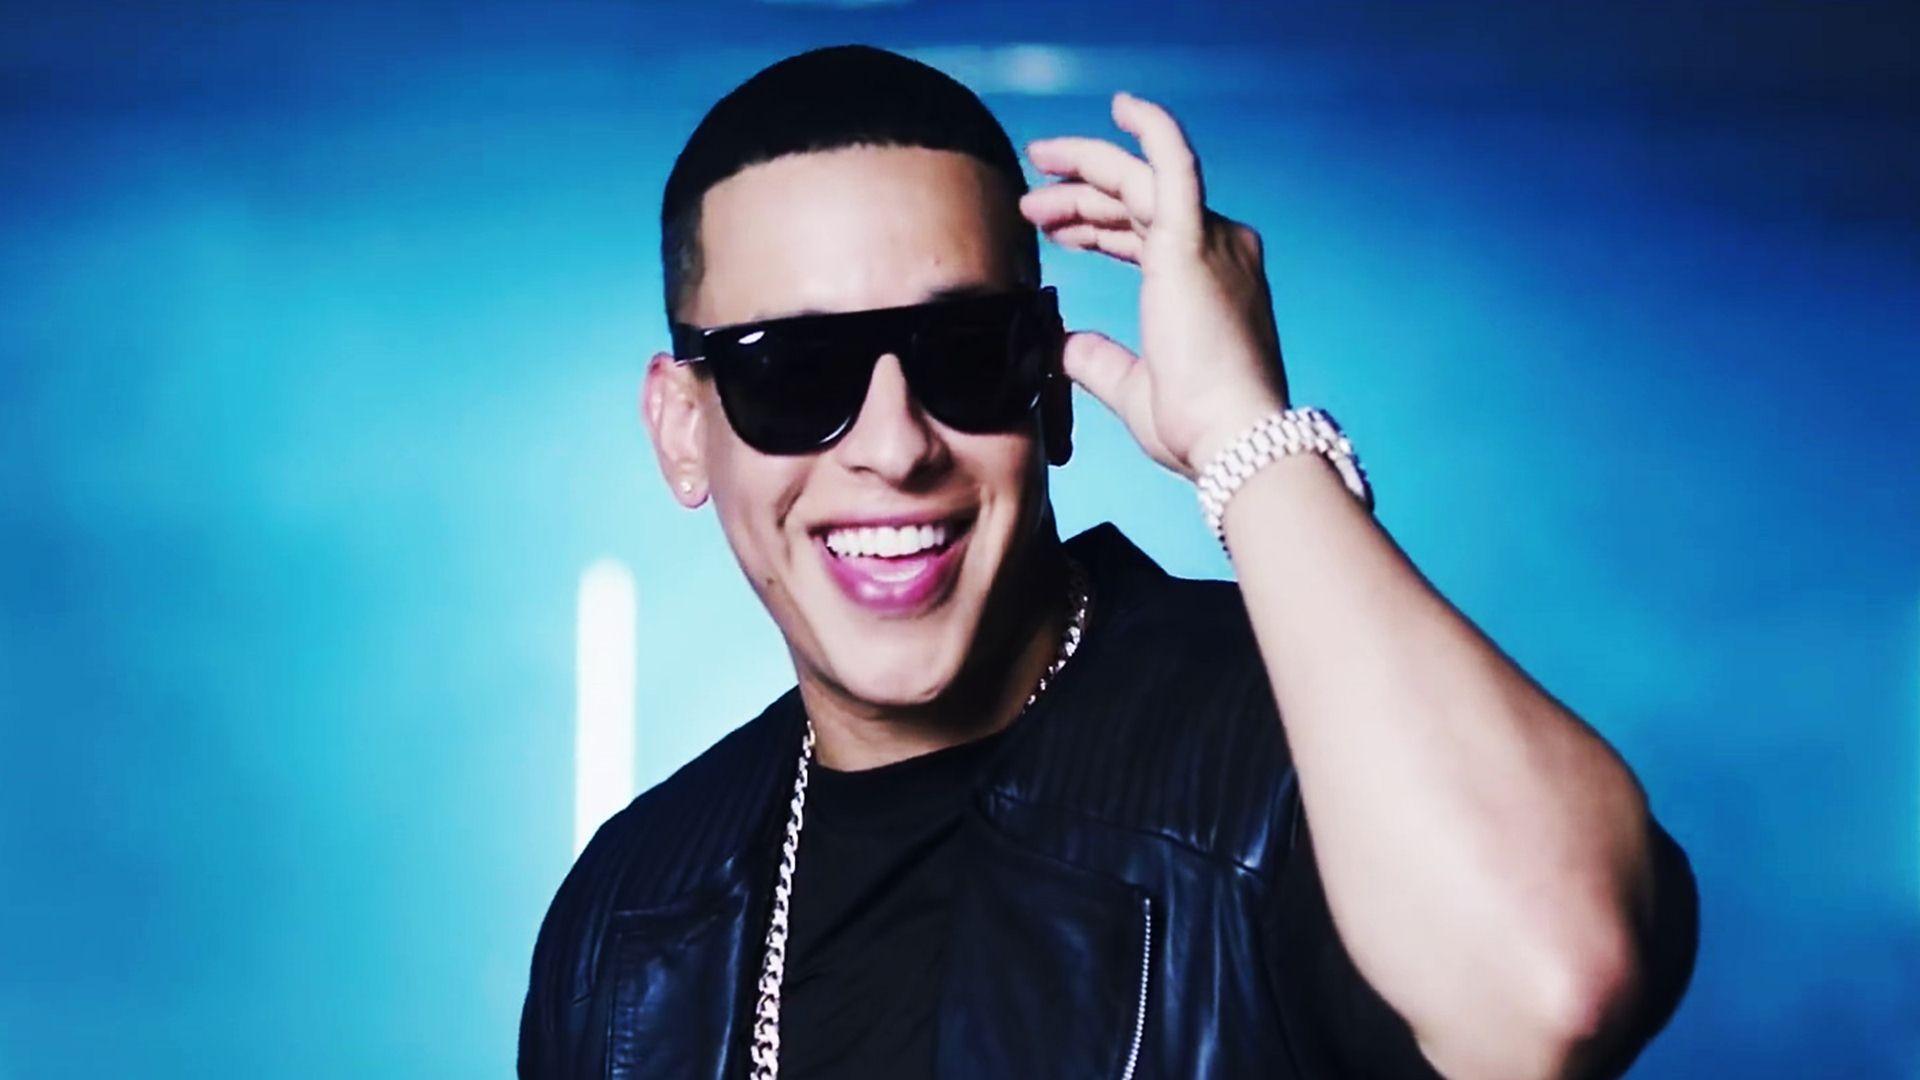 Daddy Yankee Kolpaper Awesome Free Hd Wallpapers